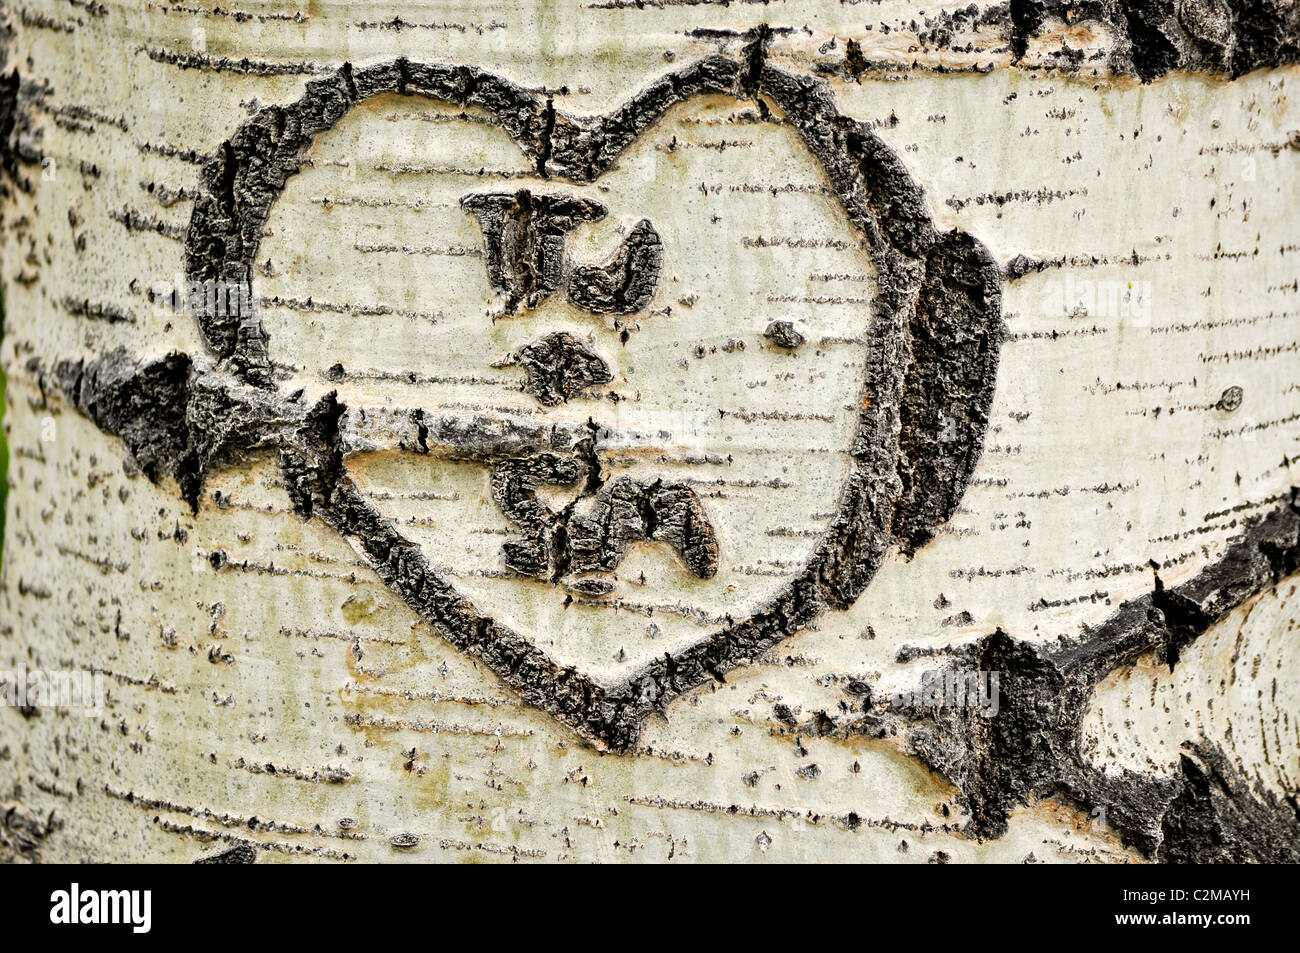 Heart and initials carved into tree trunk Stock Photo